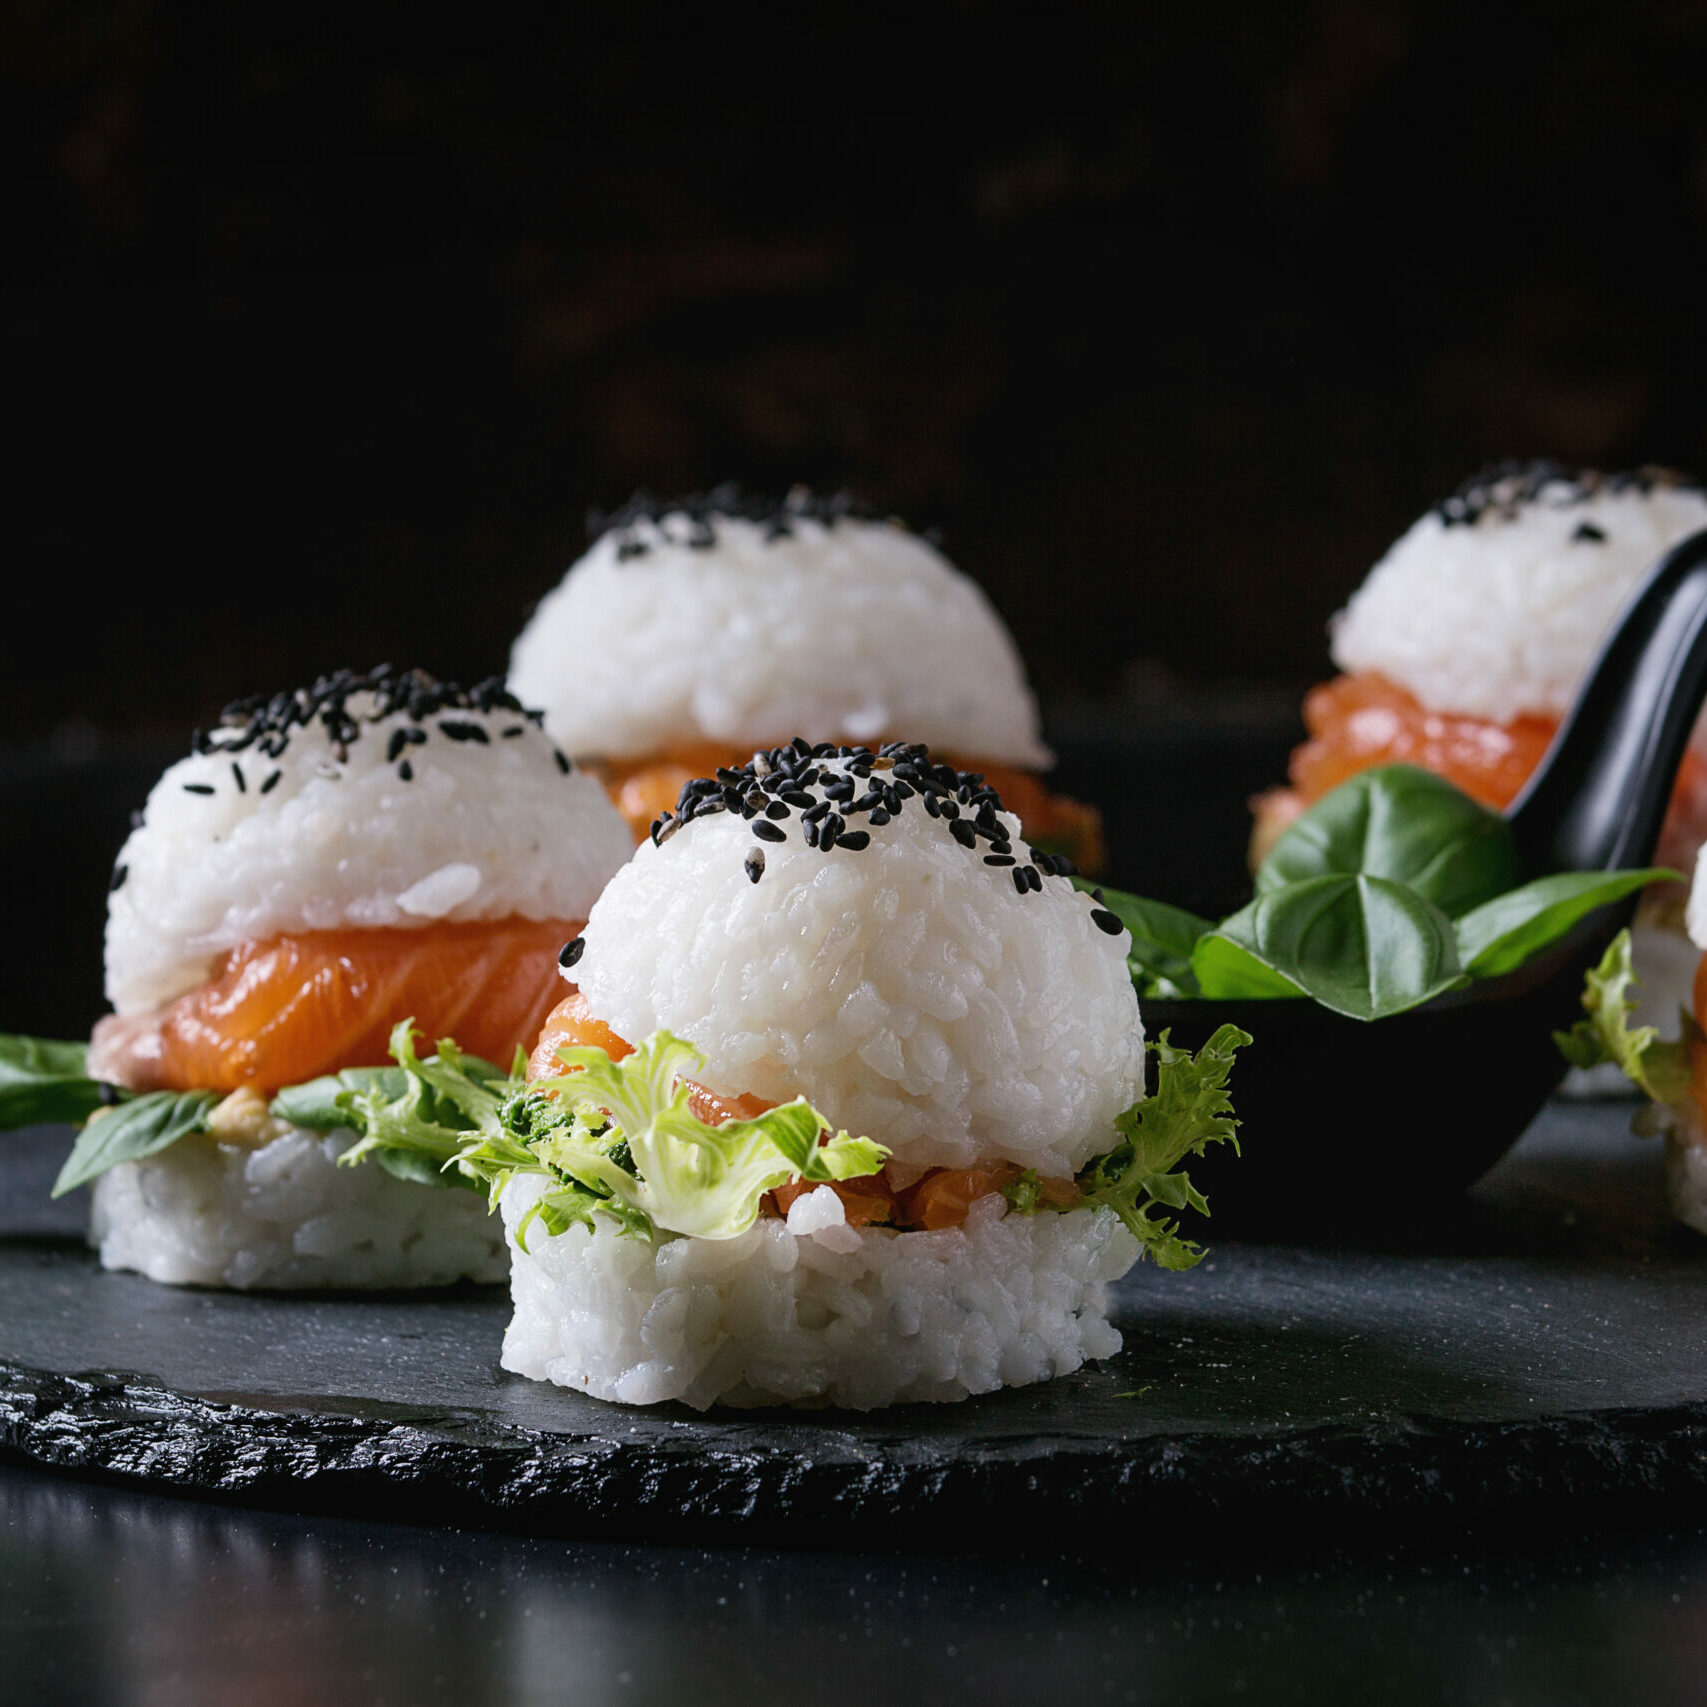 Mini rice sushi burgers with smoked salmon, green salad and sauces, black sesame served on slate stone board over black background. Modern healthy food